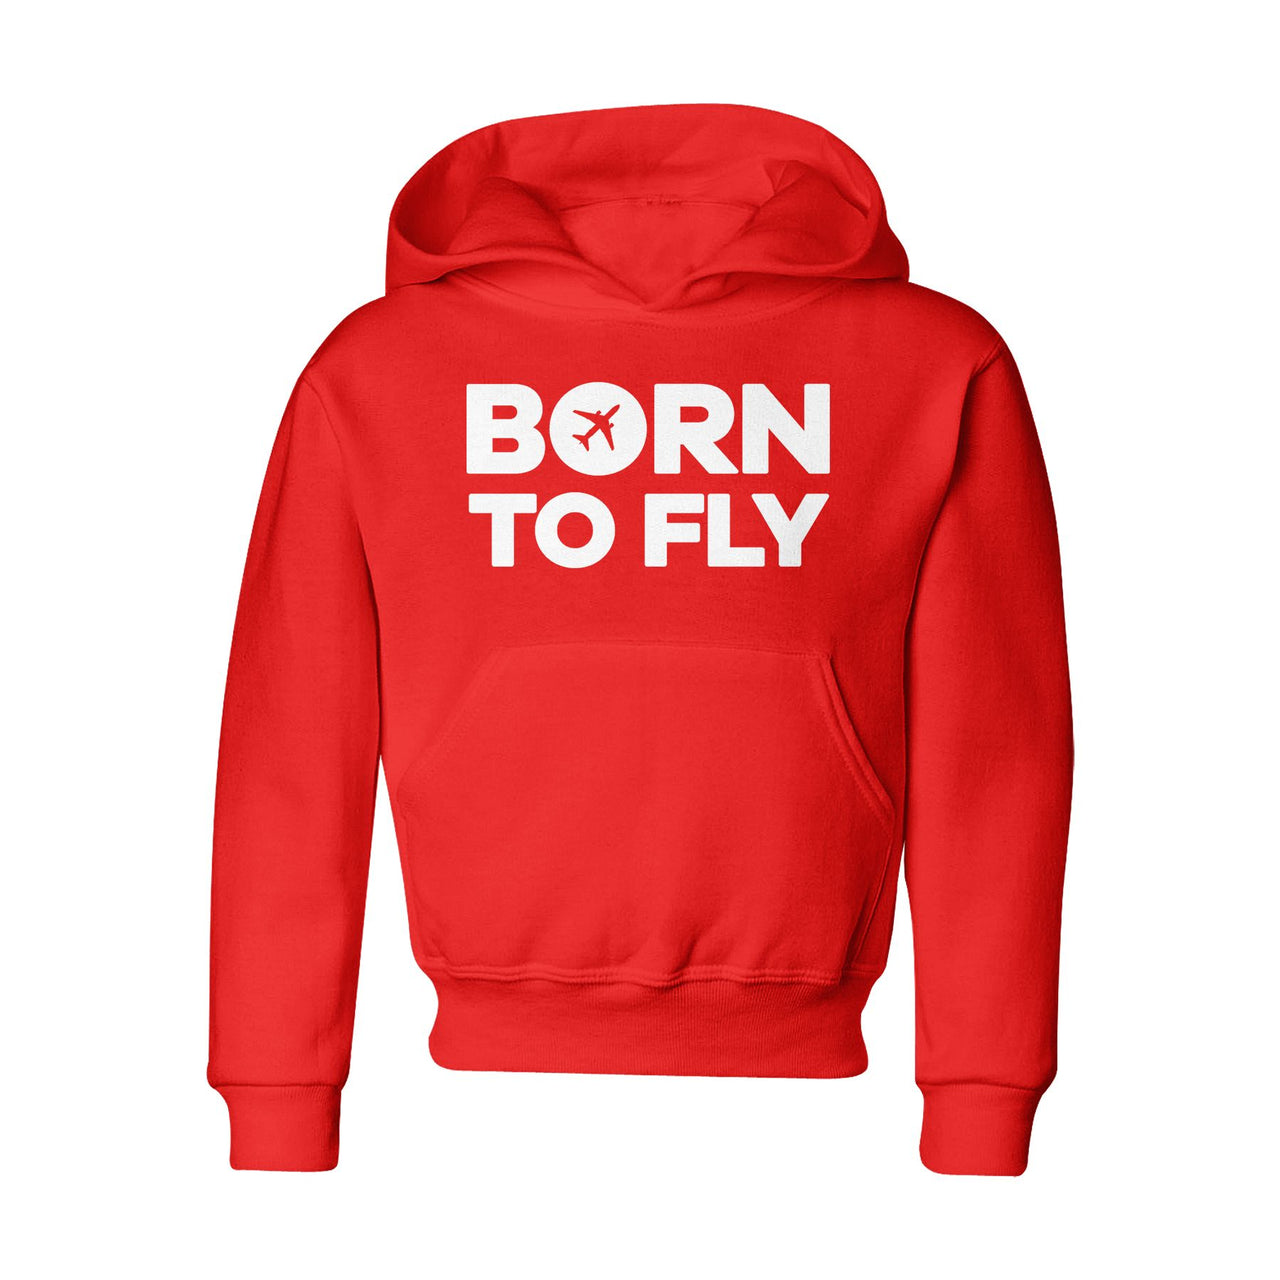 Born To Fly Special Designed "CHILDREN" Hoodies